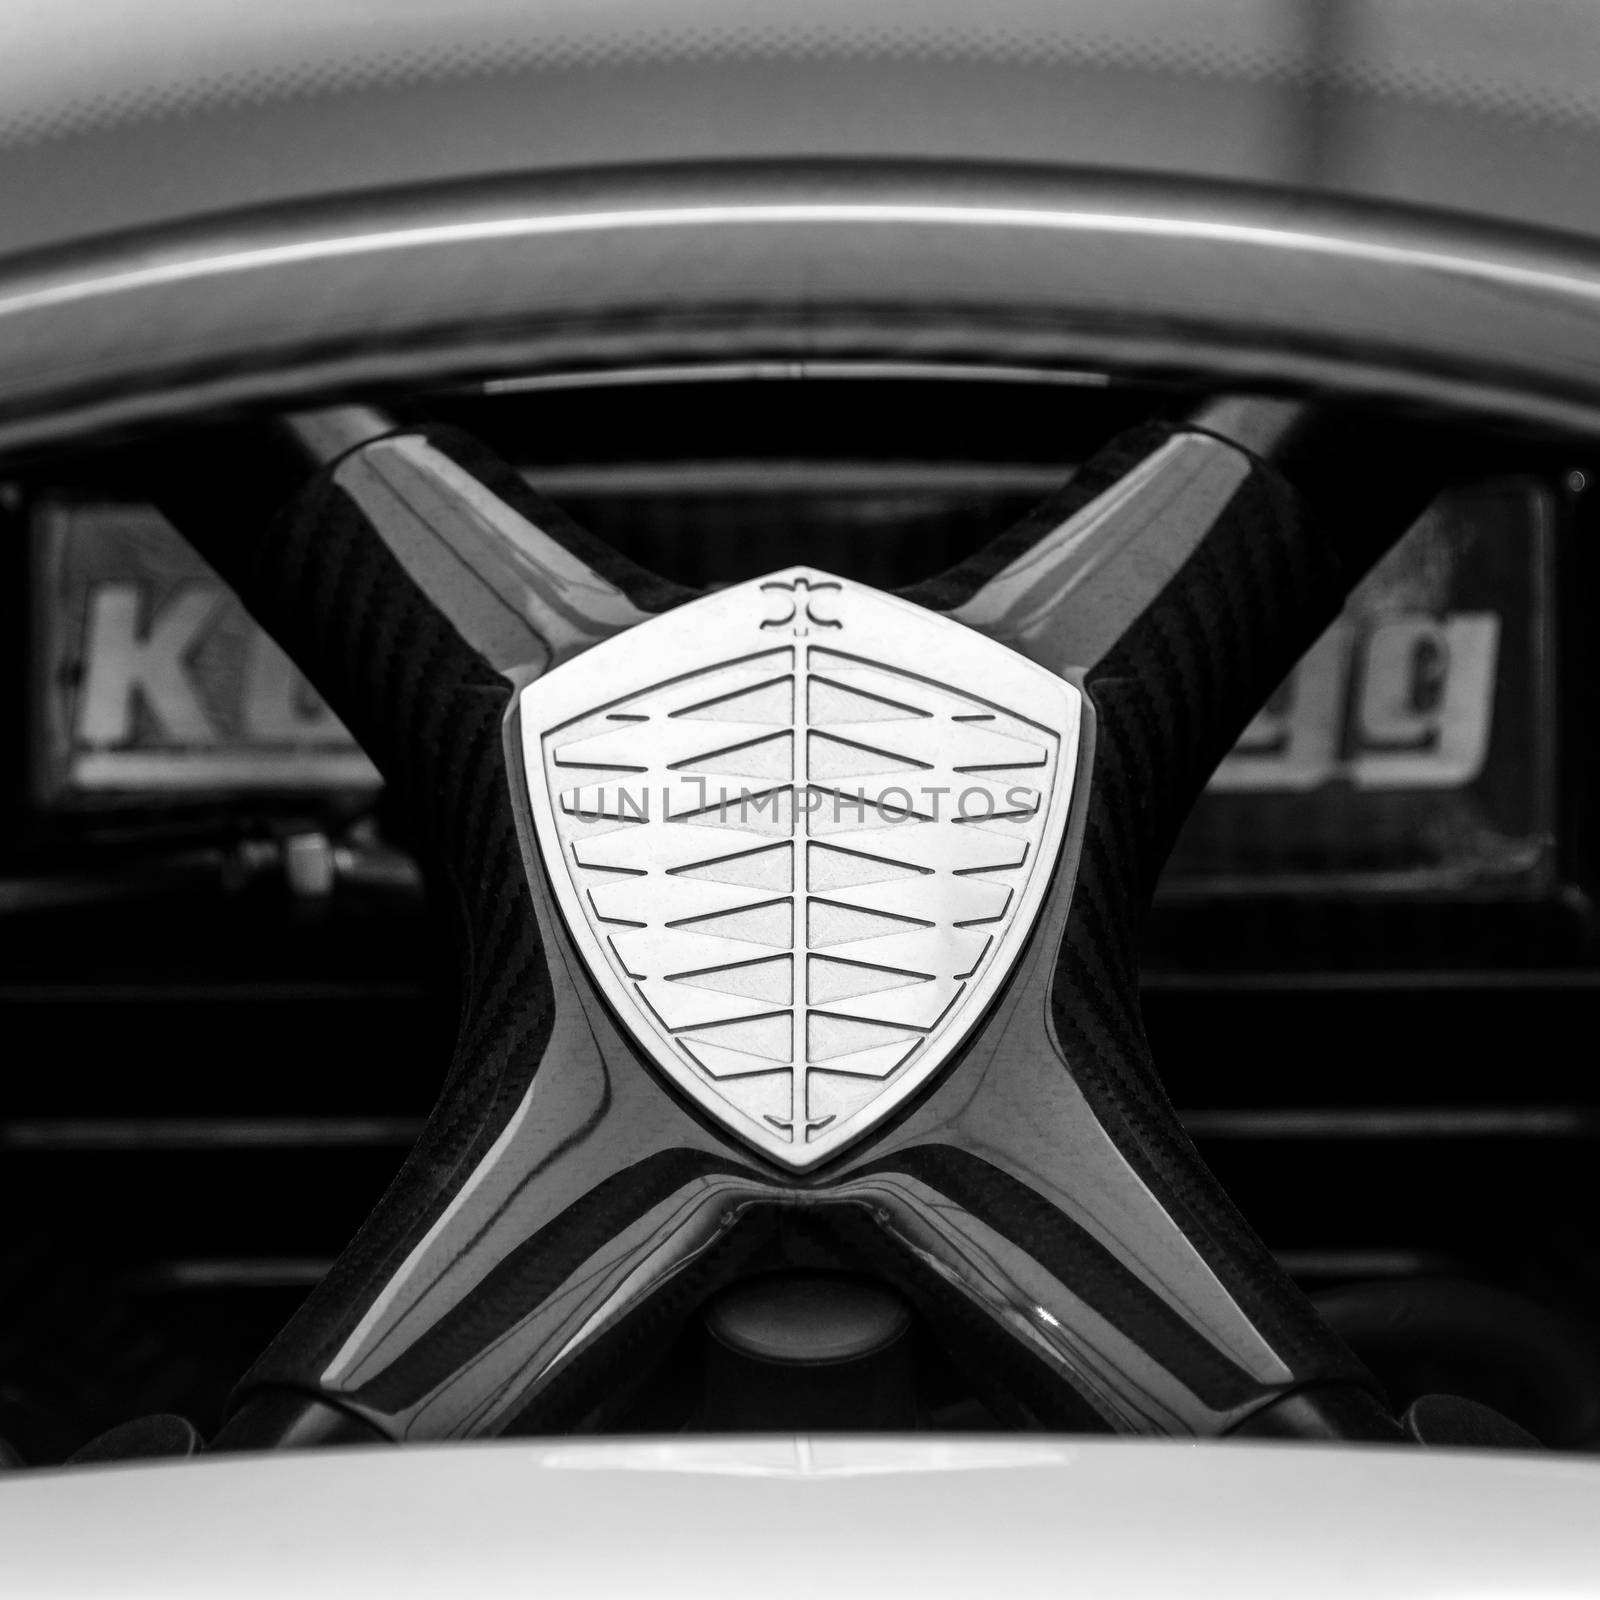 Koenigsegg logo on the back of an Agera R, in black and white